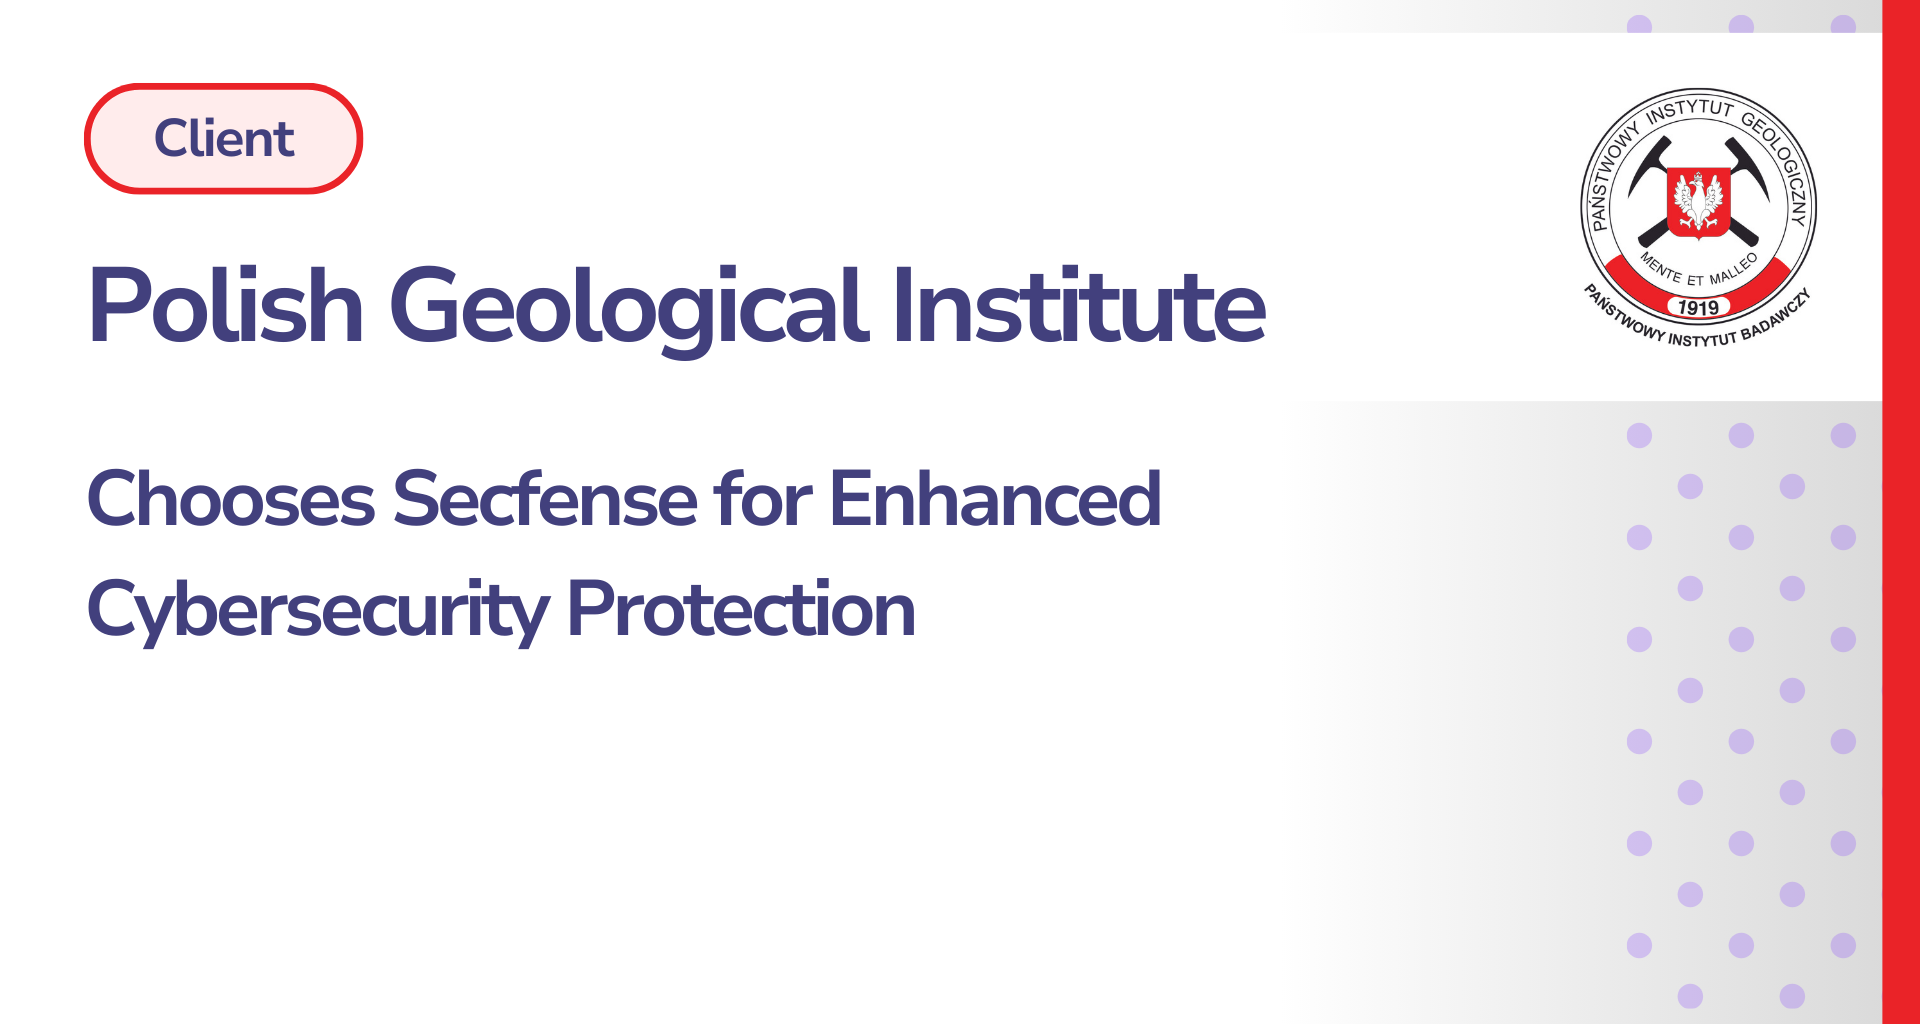 Polish Geological Institute Chooses Secfense for Enhanced Cybersecurity Protection